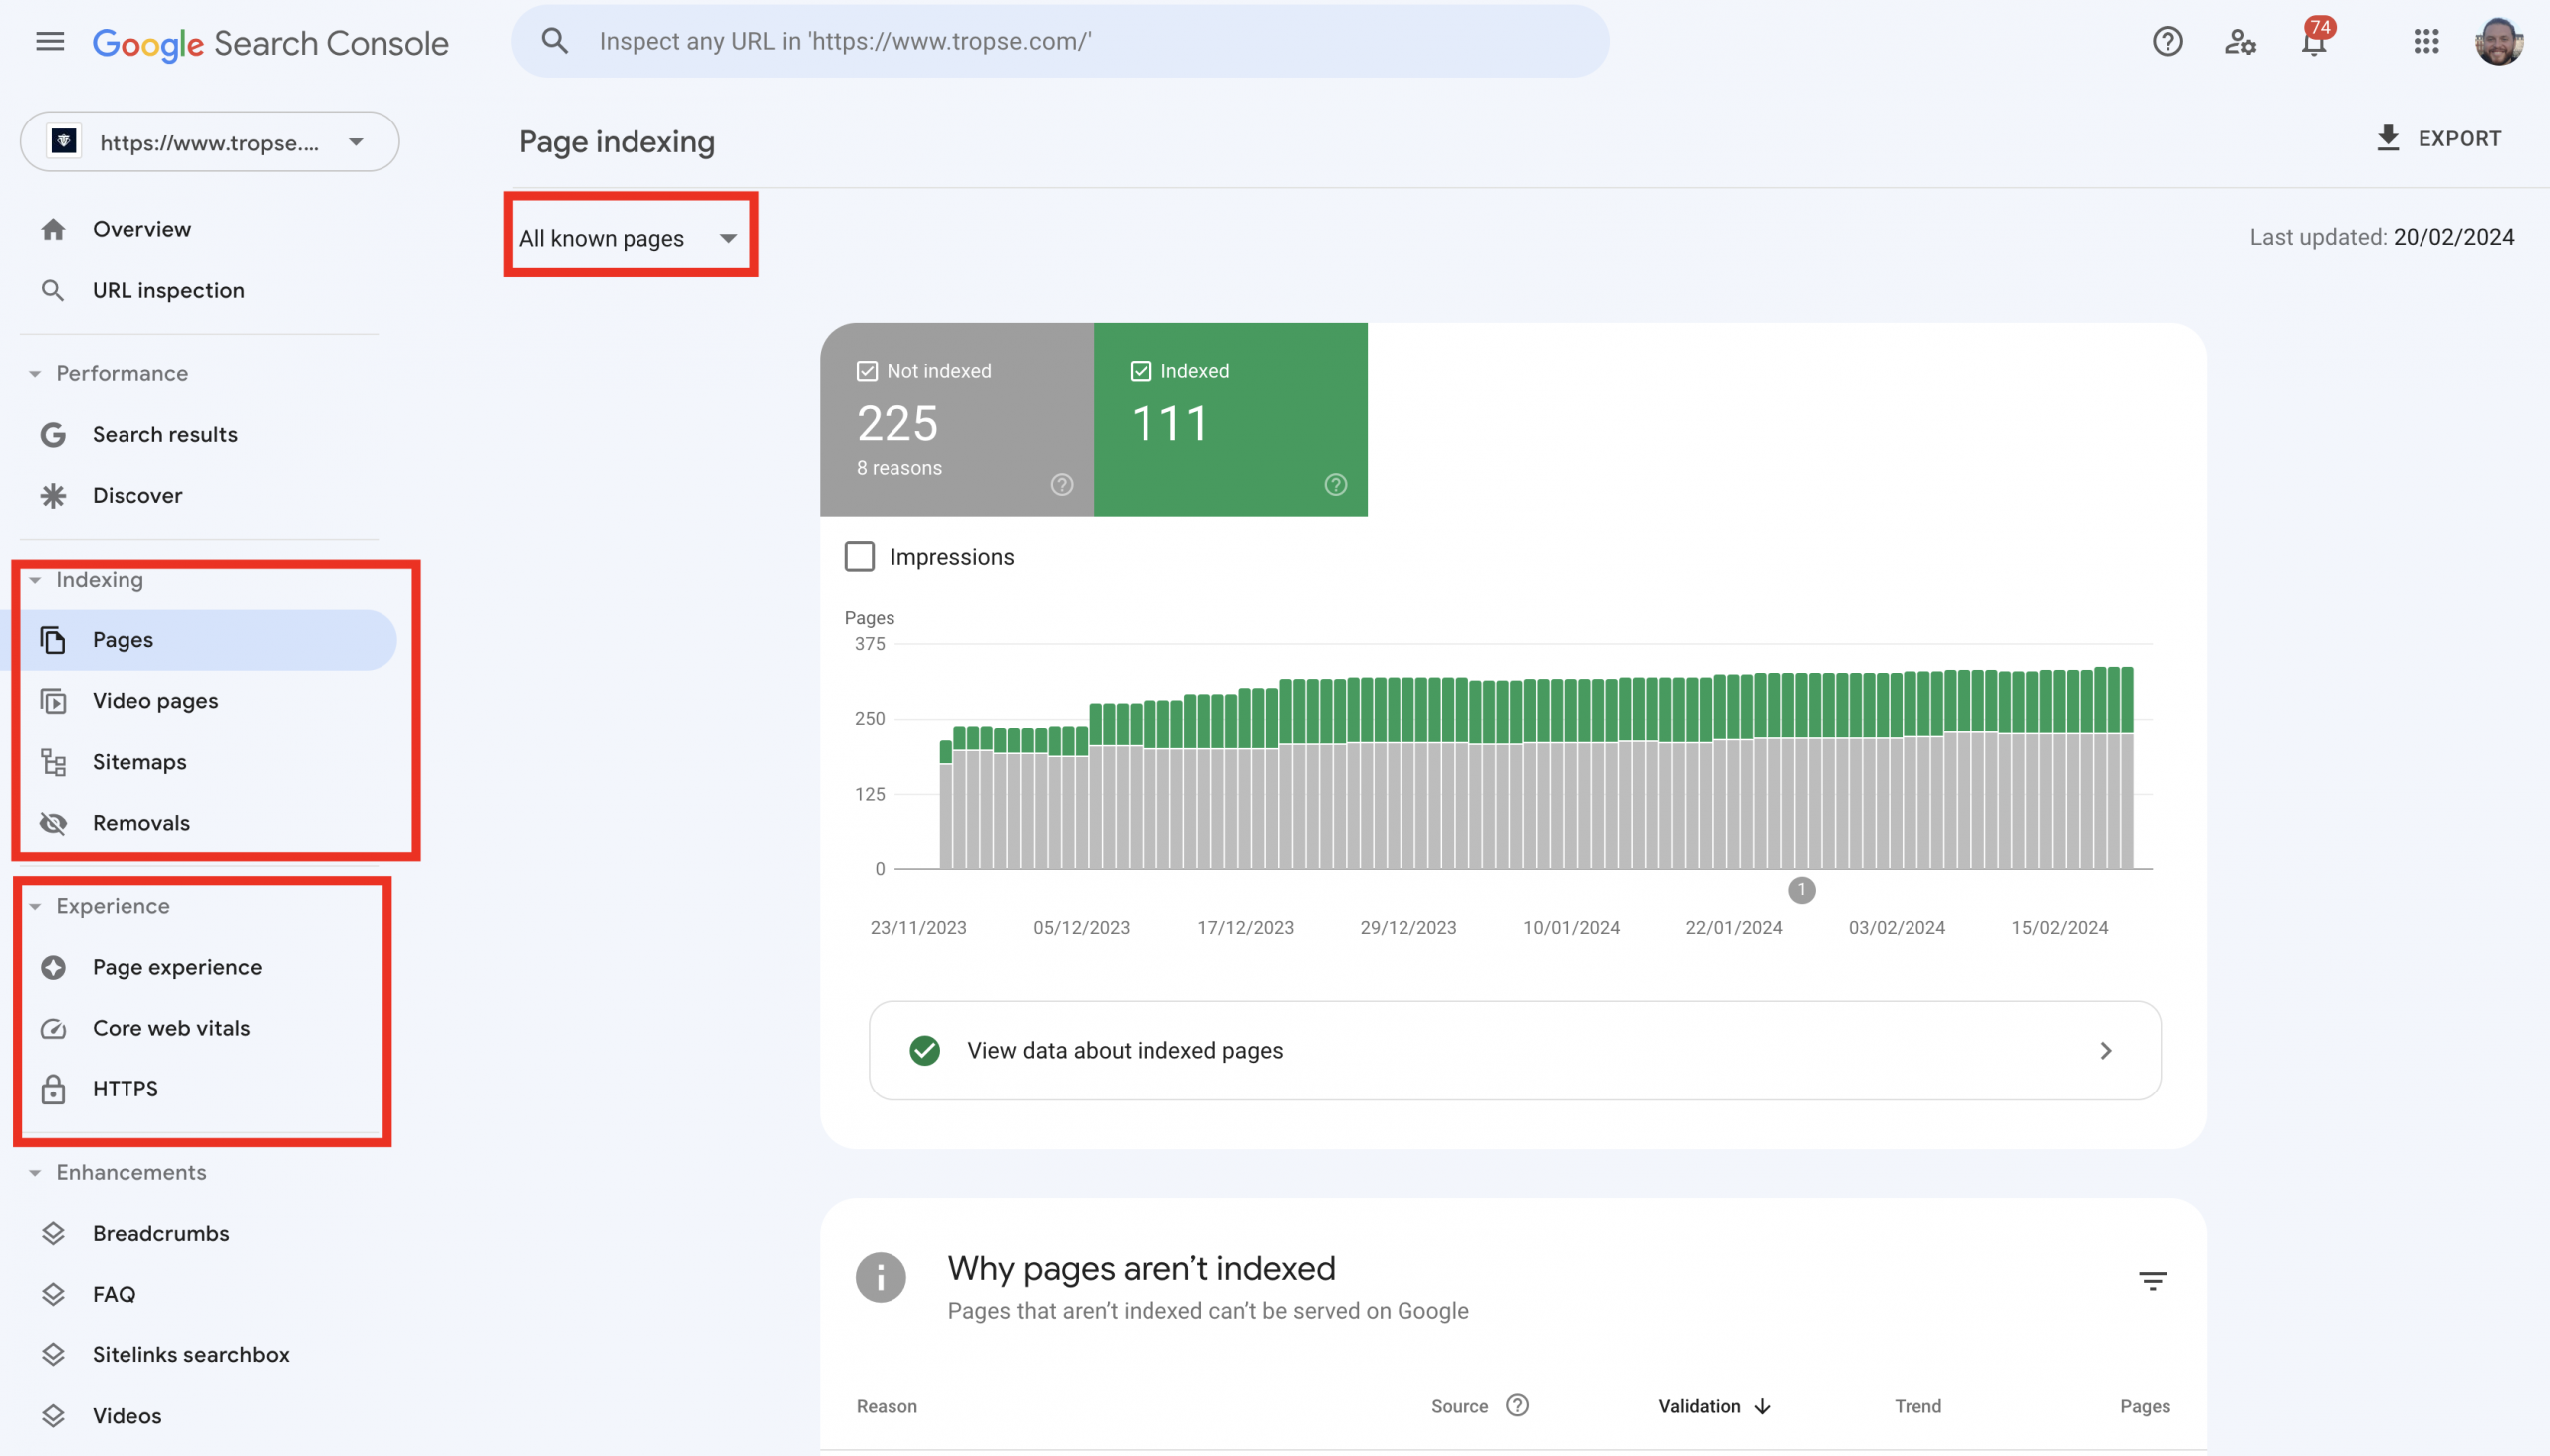 Google Search Console page indexing alexis piippo | Digital Marknadsföring, SEO, SEM